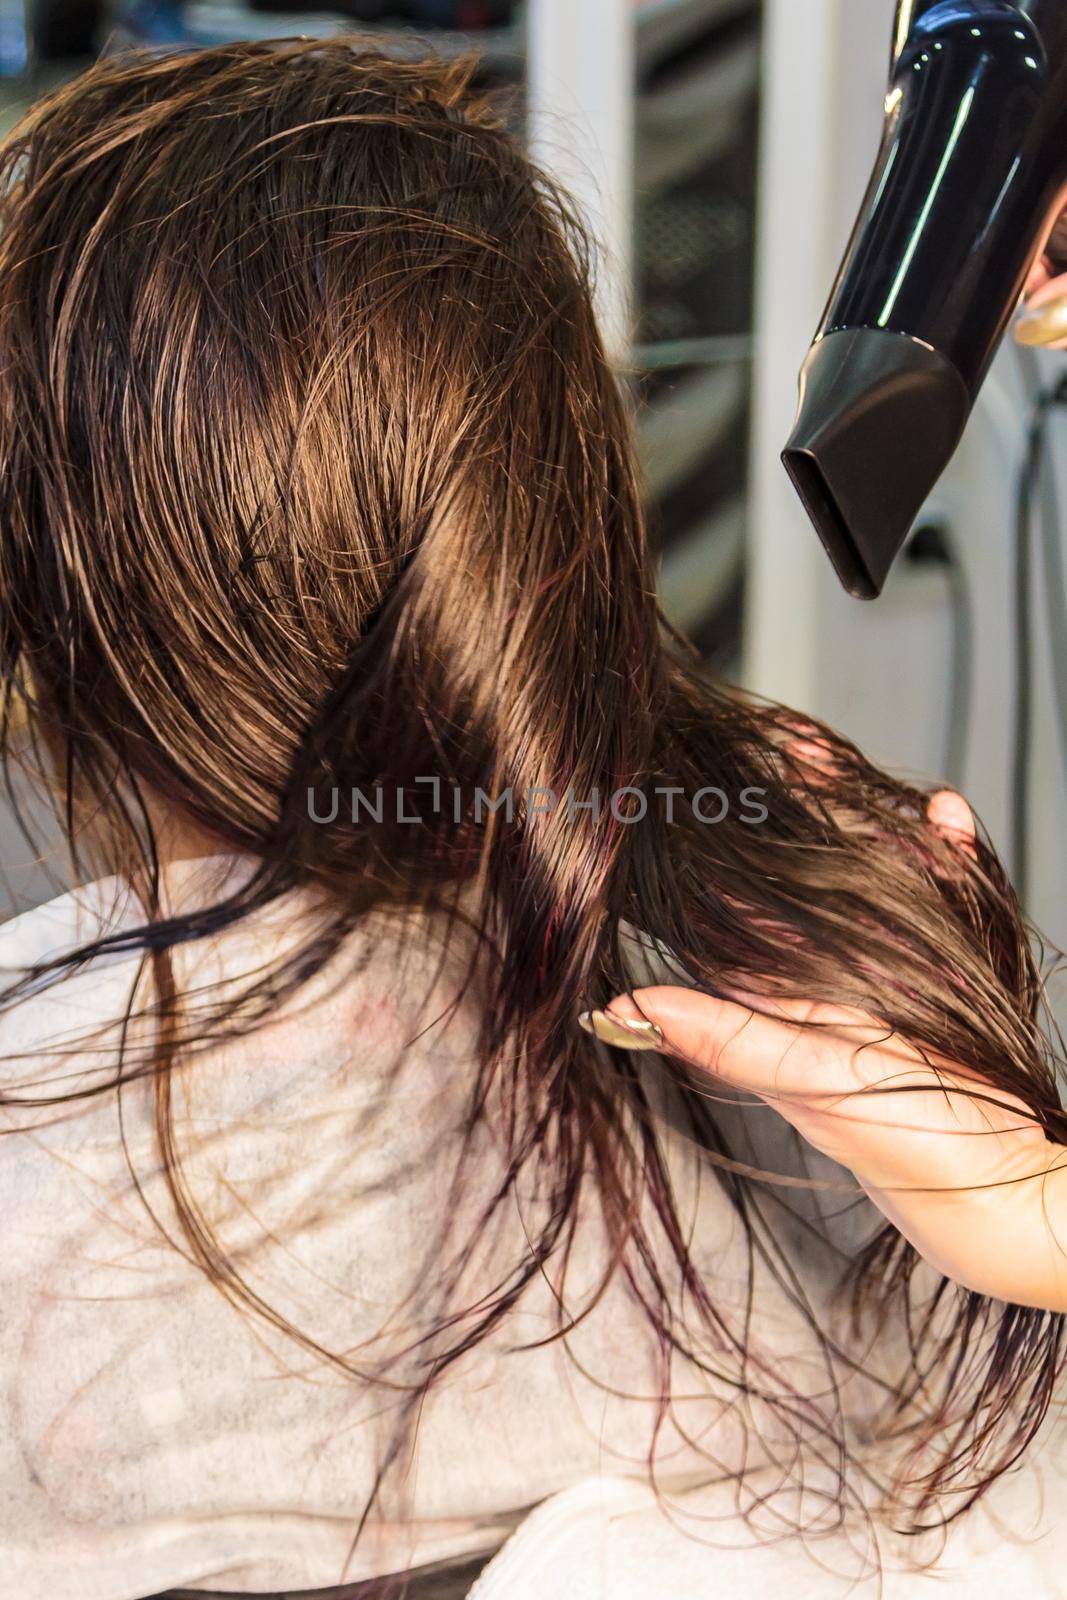 Young girl, hairdresser dries her hair with a hairdryer in a beauty salon by Yurich32